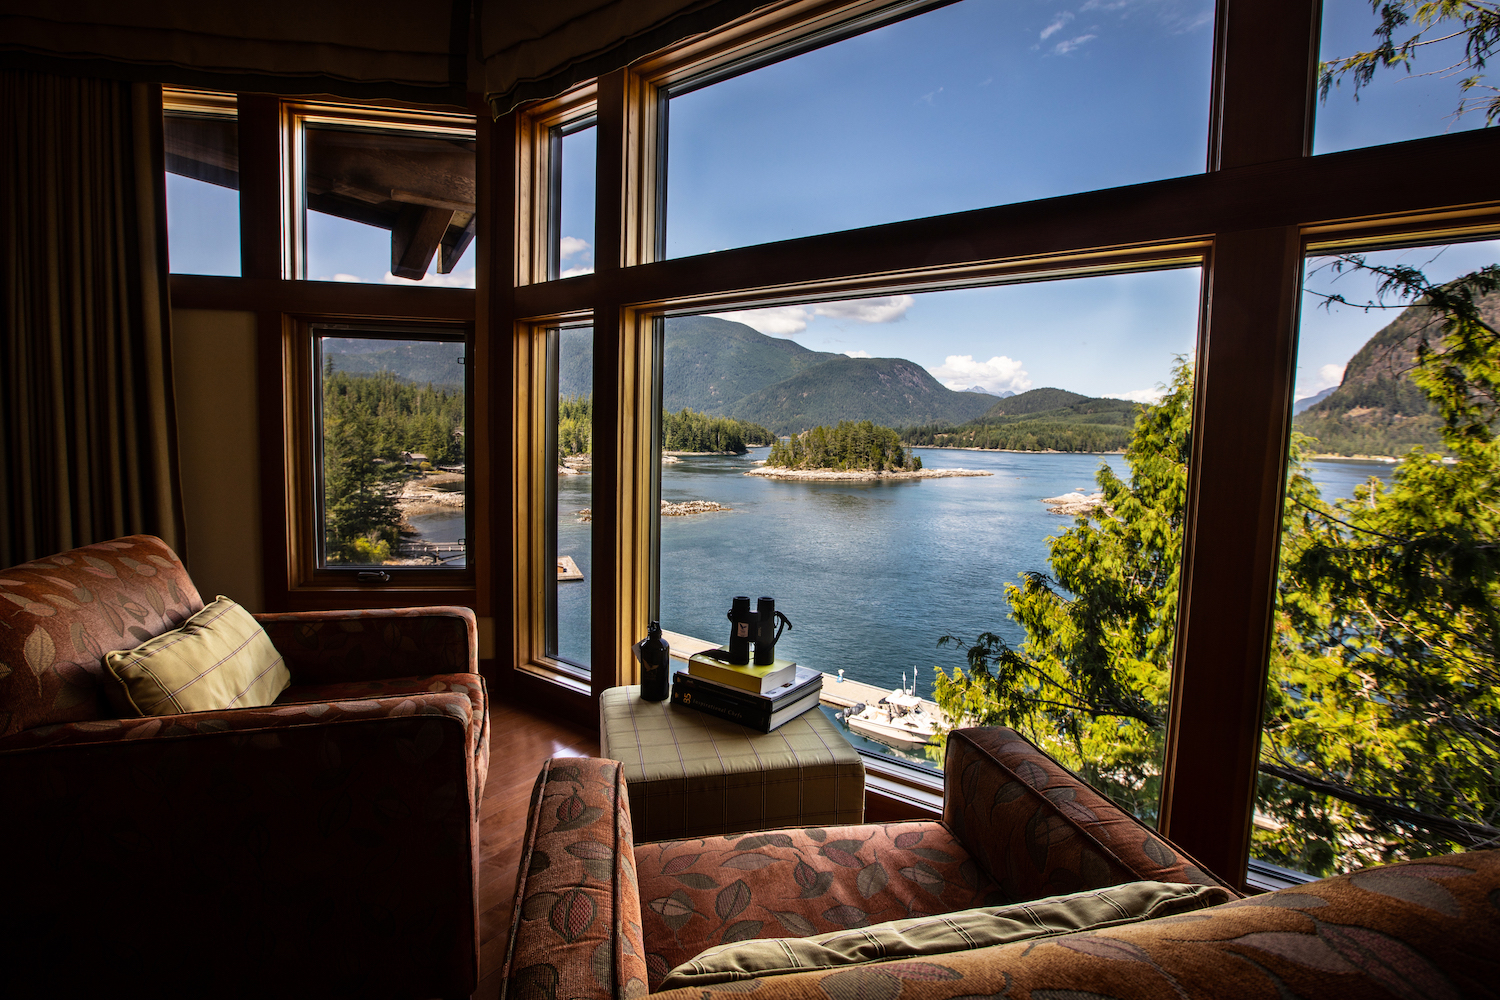 View from a guest bedroom at Sonora Resort - photo credit Mark Yuen